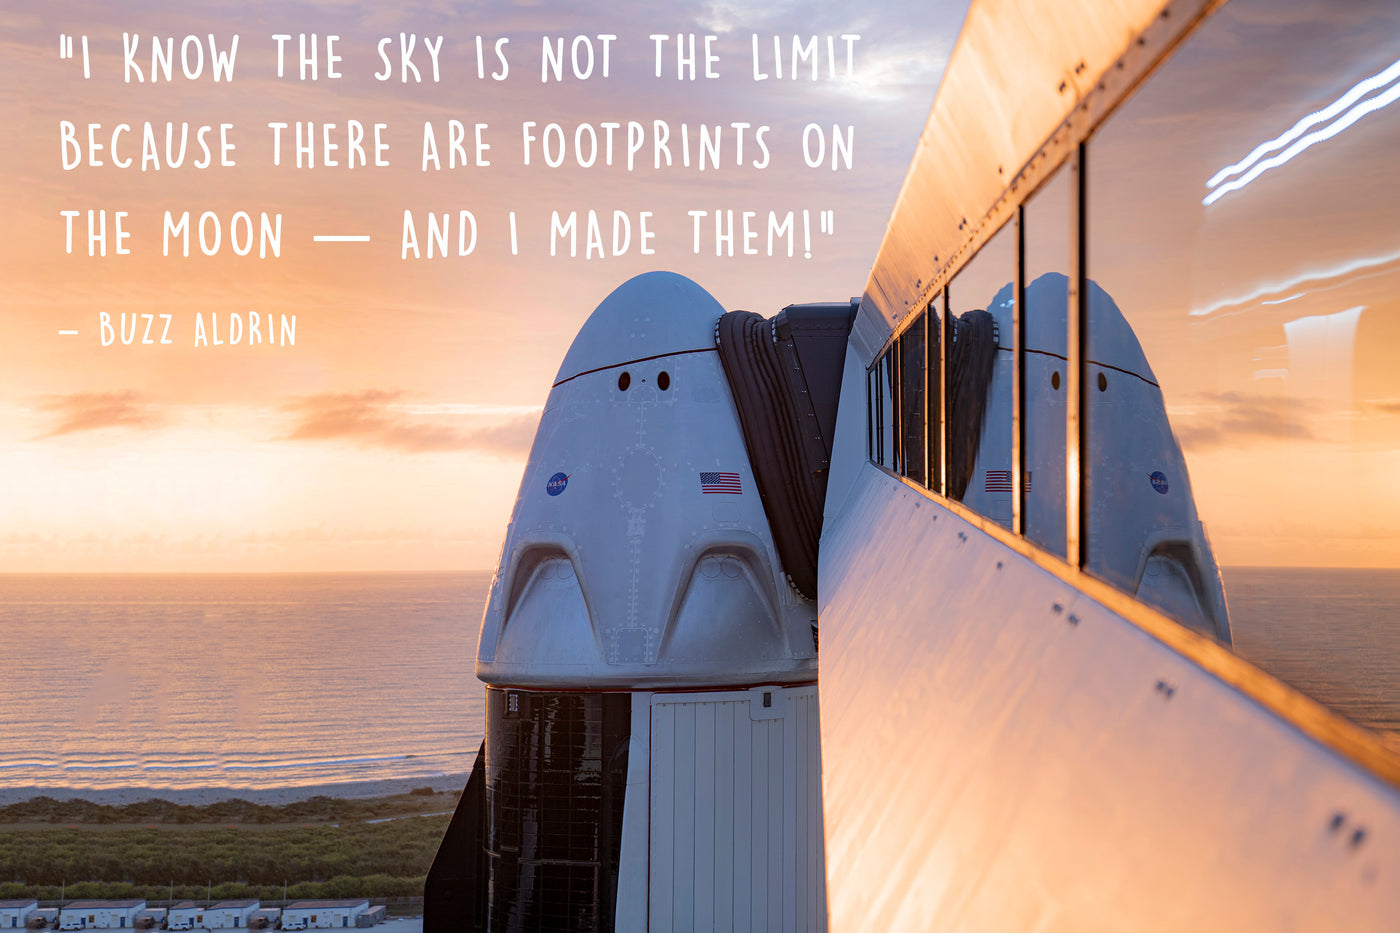 SpaceX dragon capsule sat on NASA Kennedy Space Centre Florida launchpad waiting to launch America. With inspirational quote from NASA apollo astronaut Buzz Aldrin - I know the sky is not the limit because there are footprints on the moon and I made them